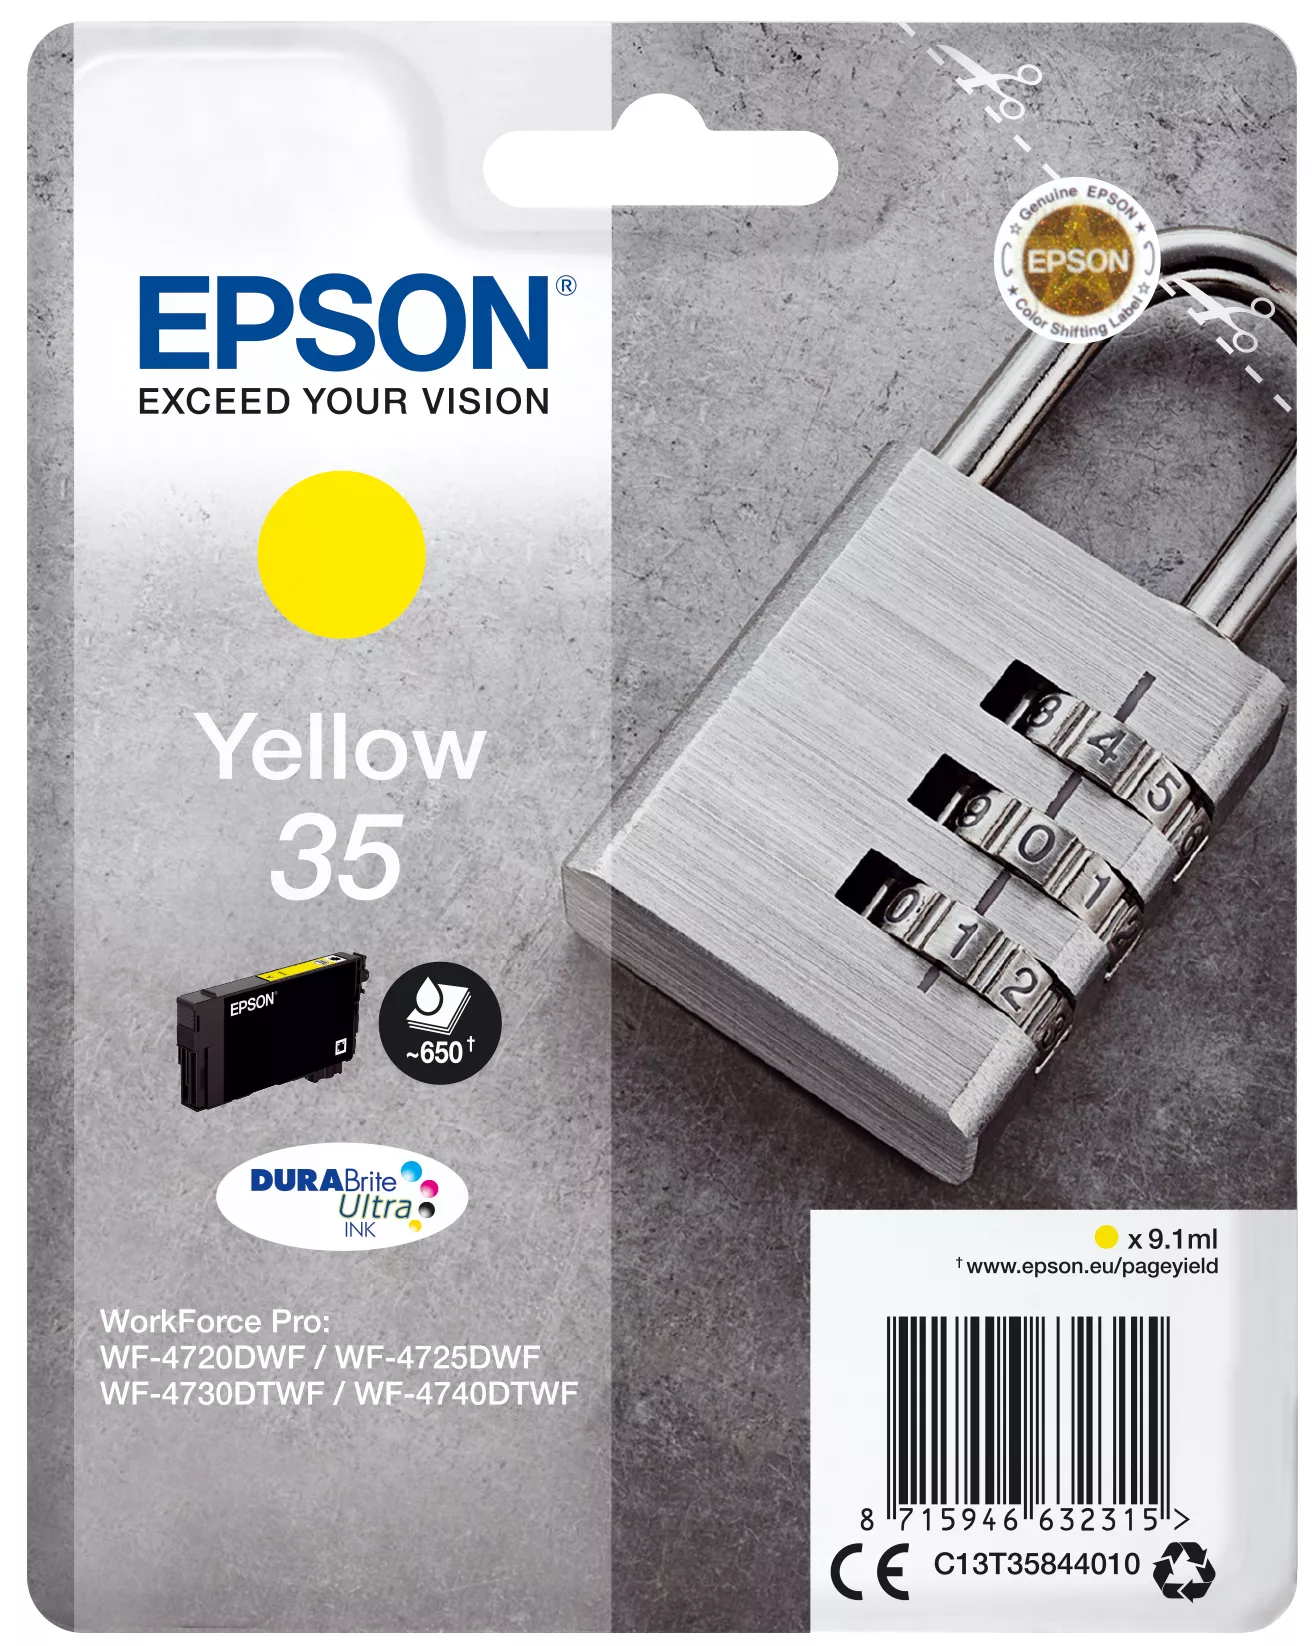 Achat EPSON 35 Ink Yellow 9.1ml Blister sur hello RSE